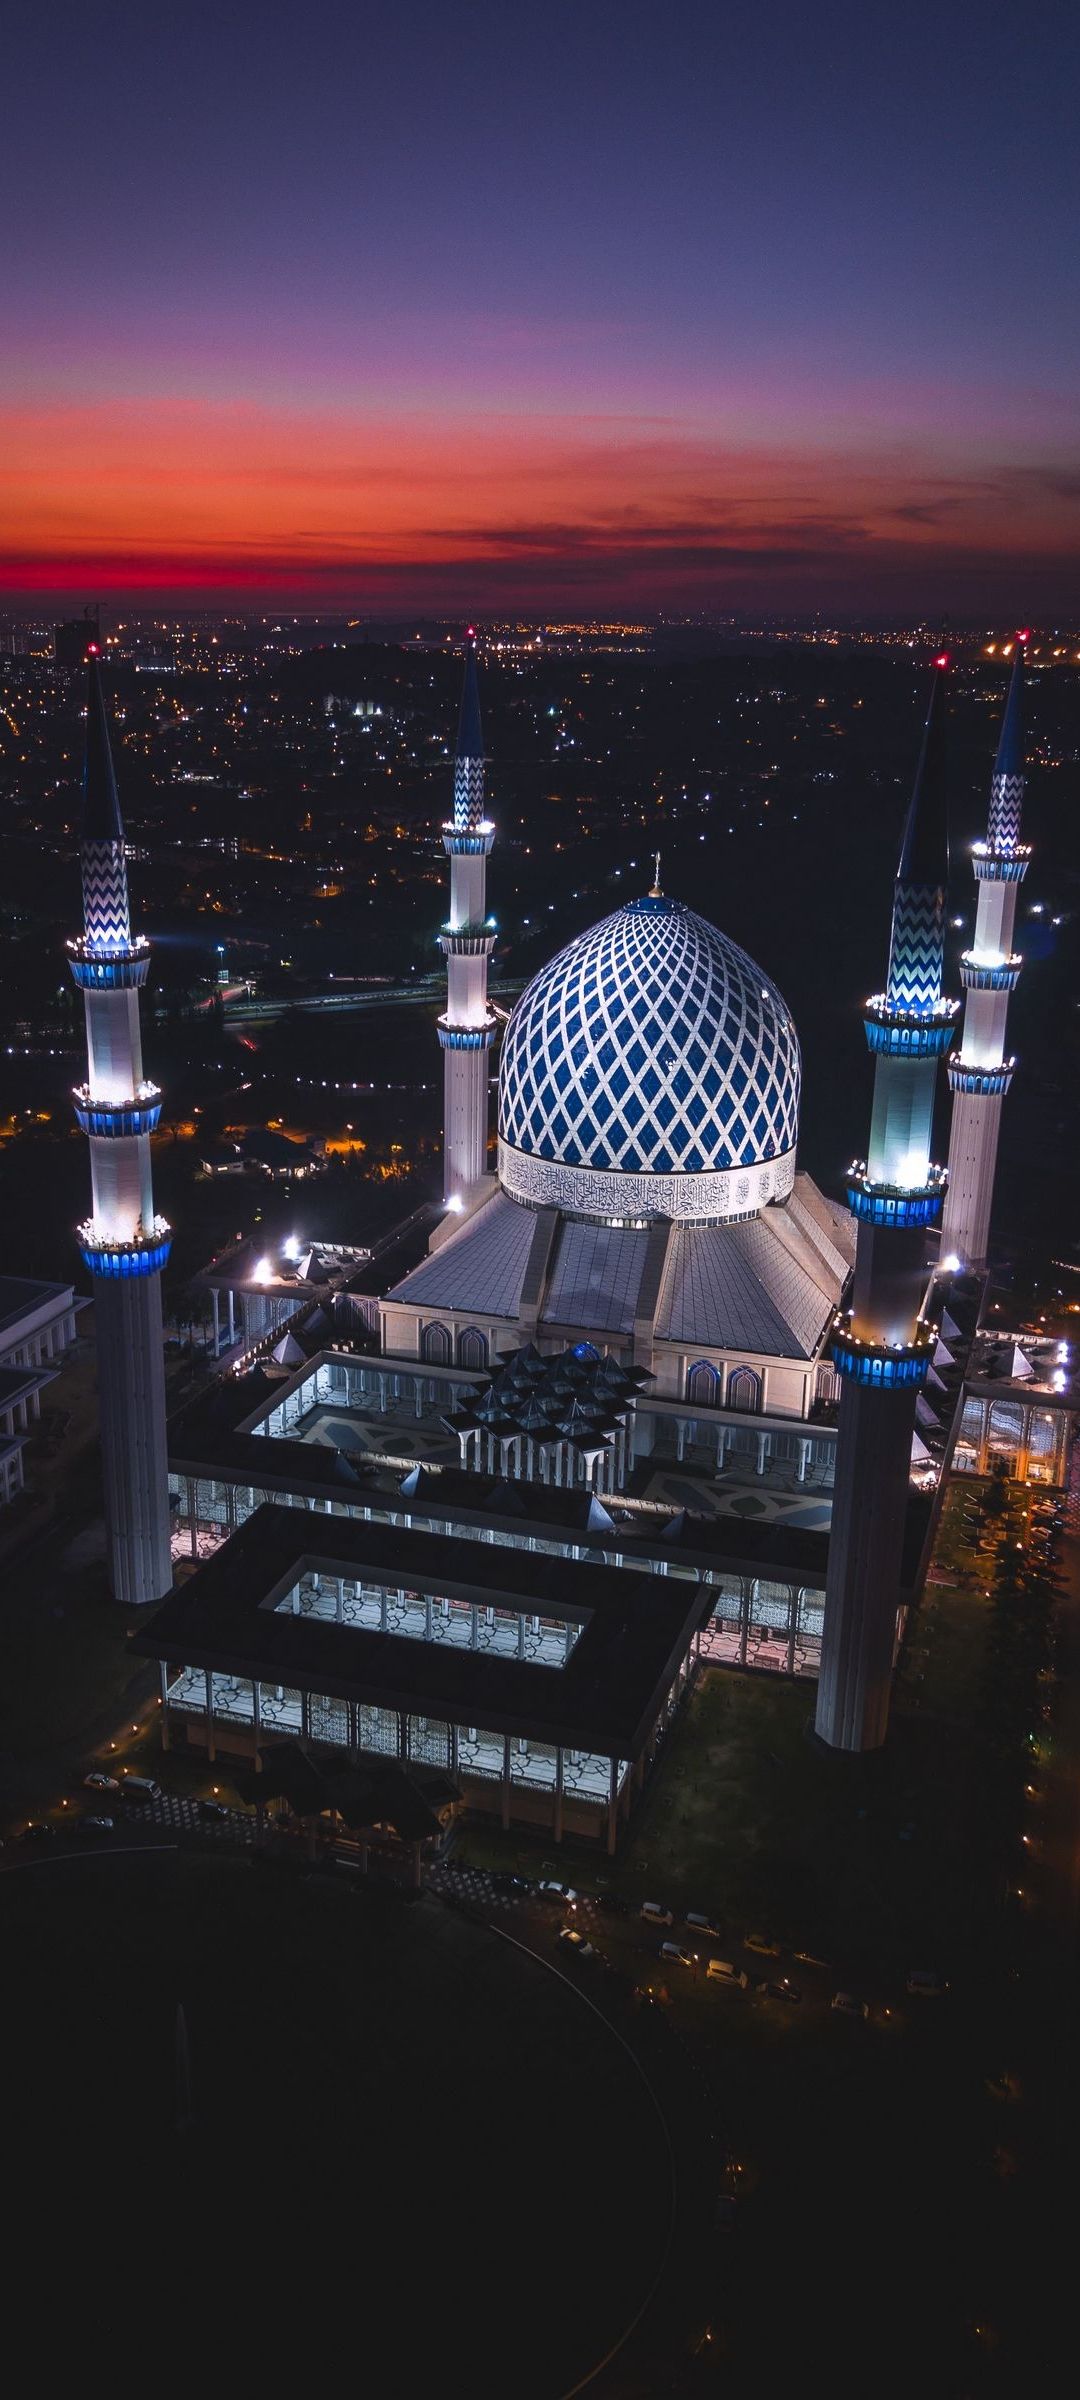 350 Mosque Pictures HD  Download Free Images on Unsplash